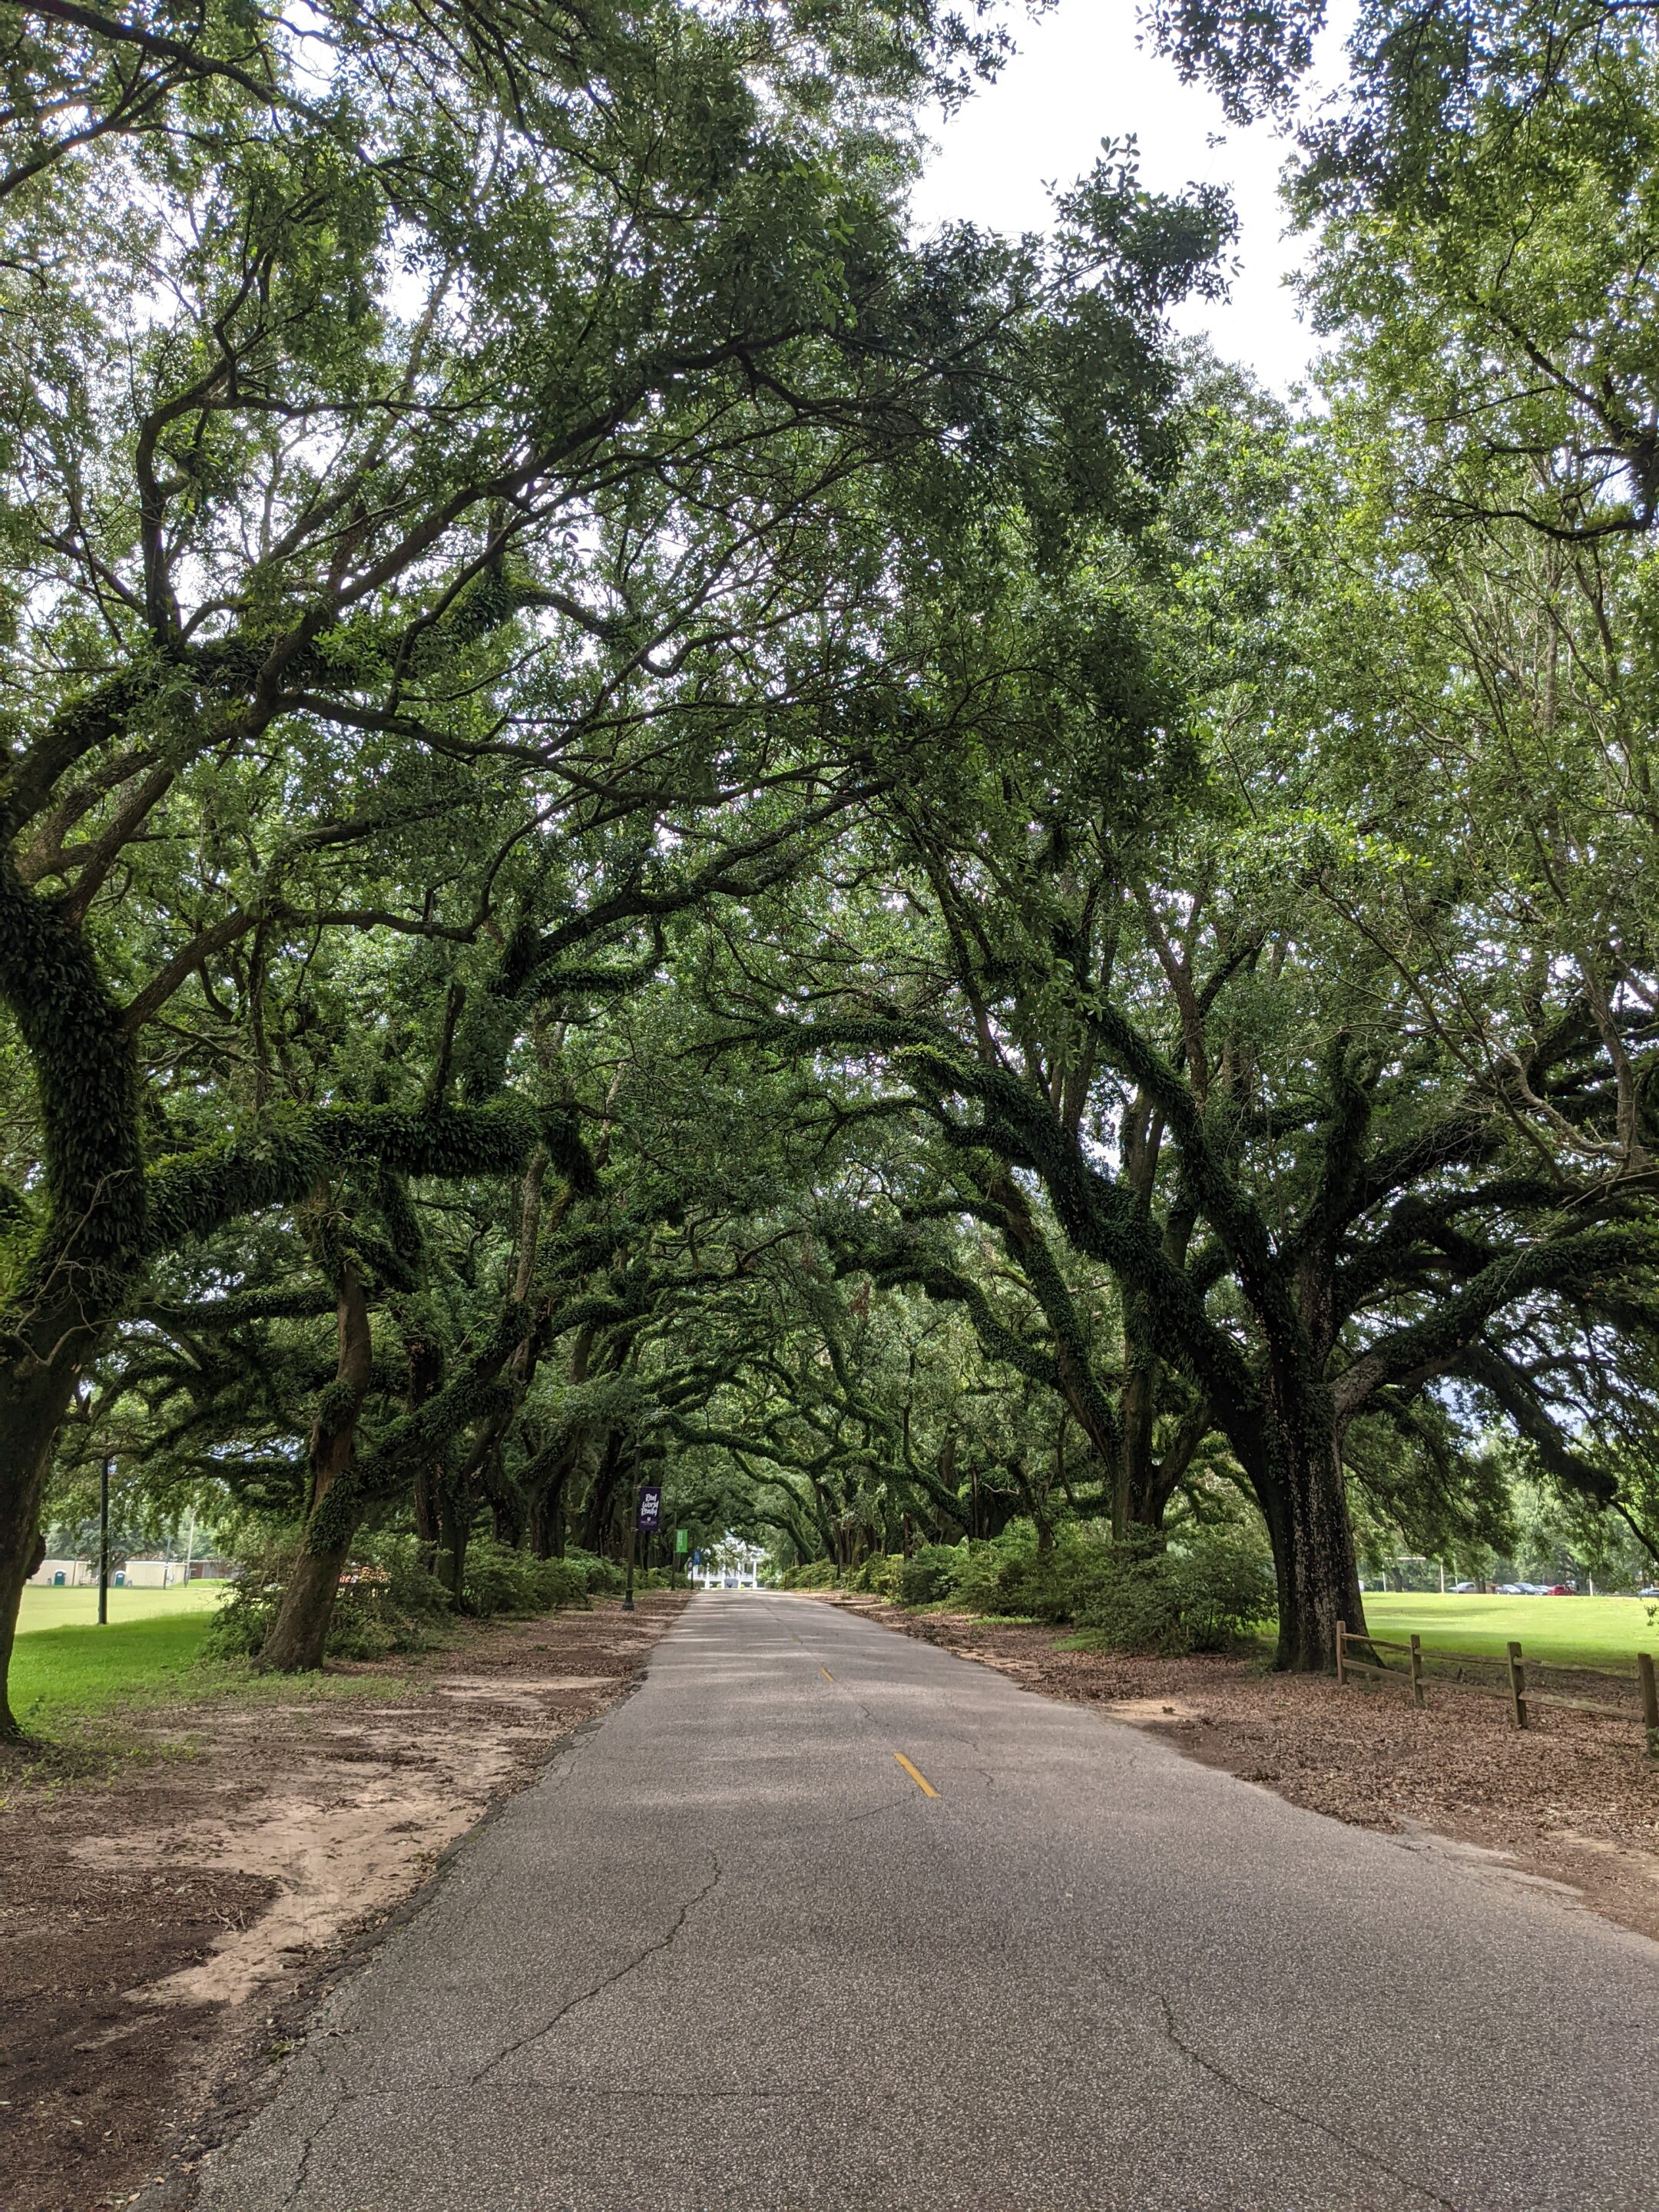 Old oak trees line road making a shady canopy